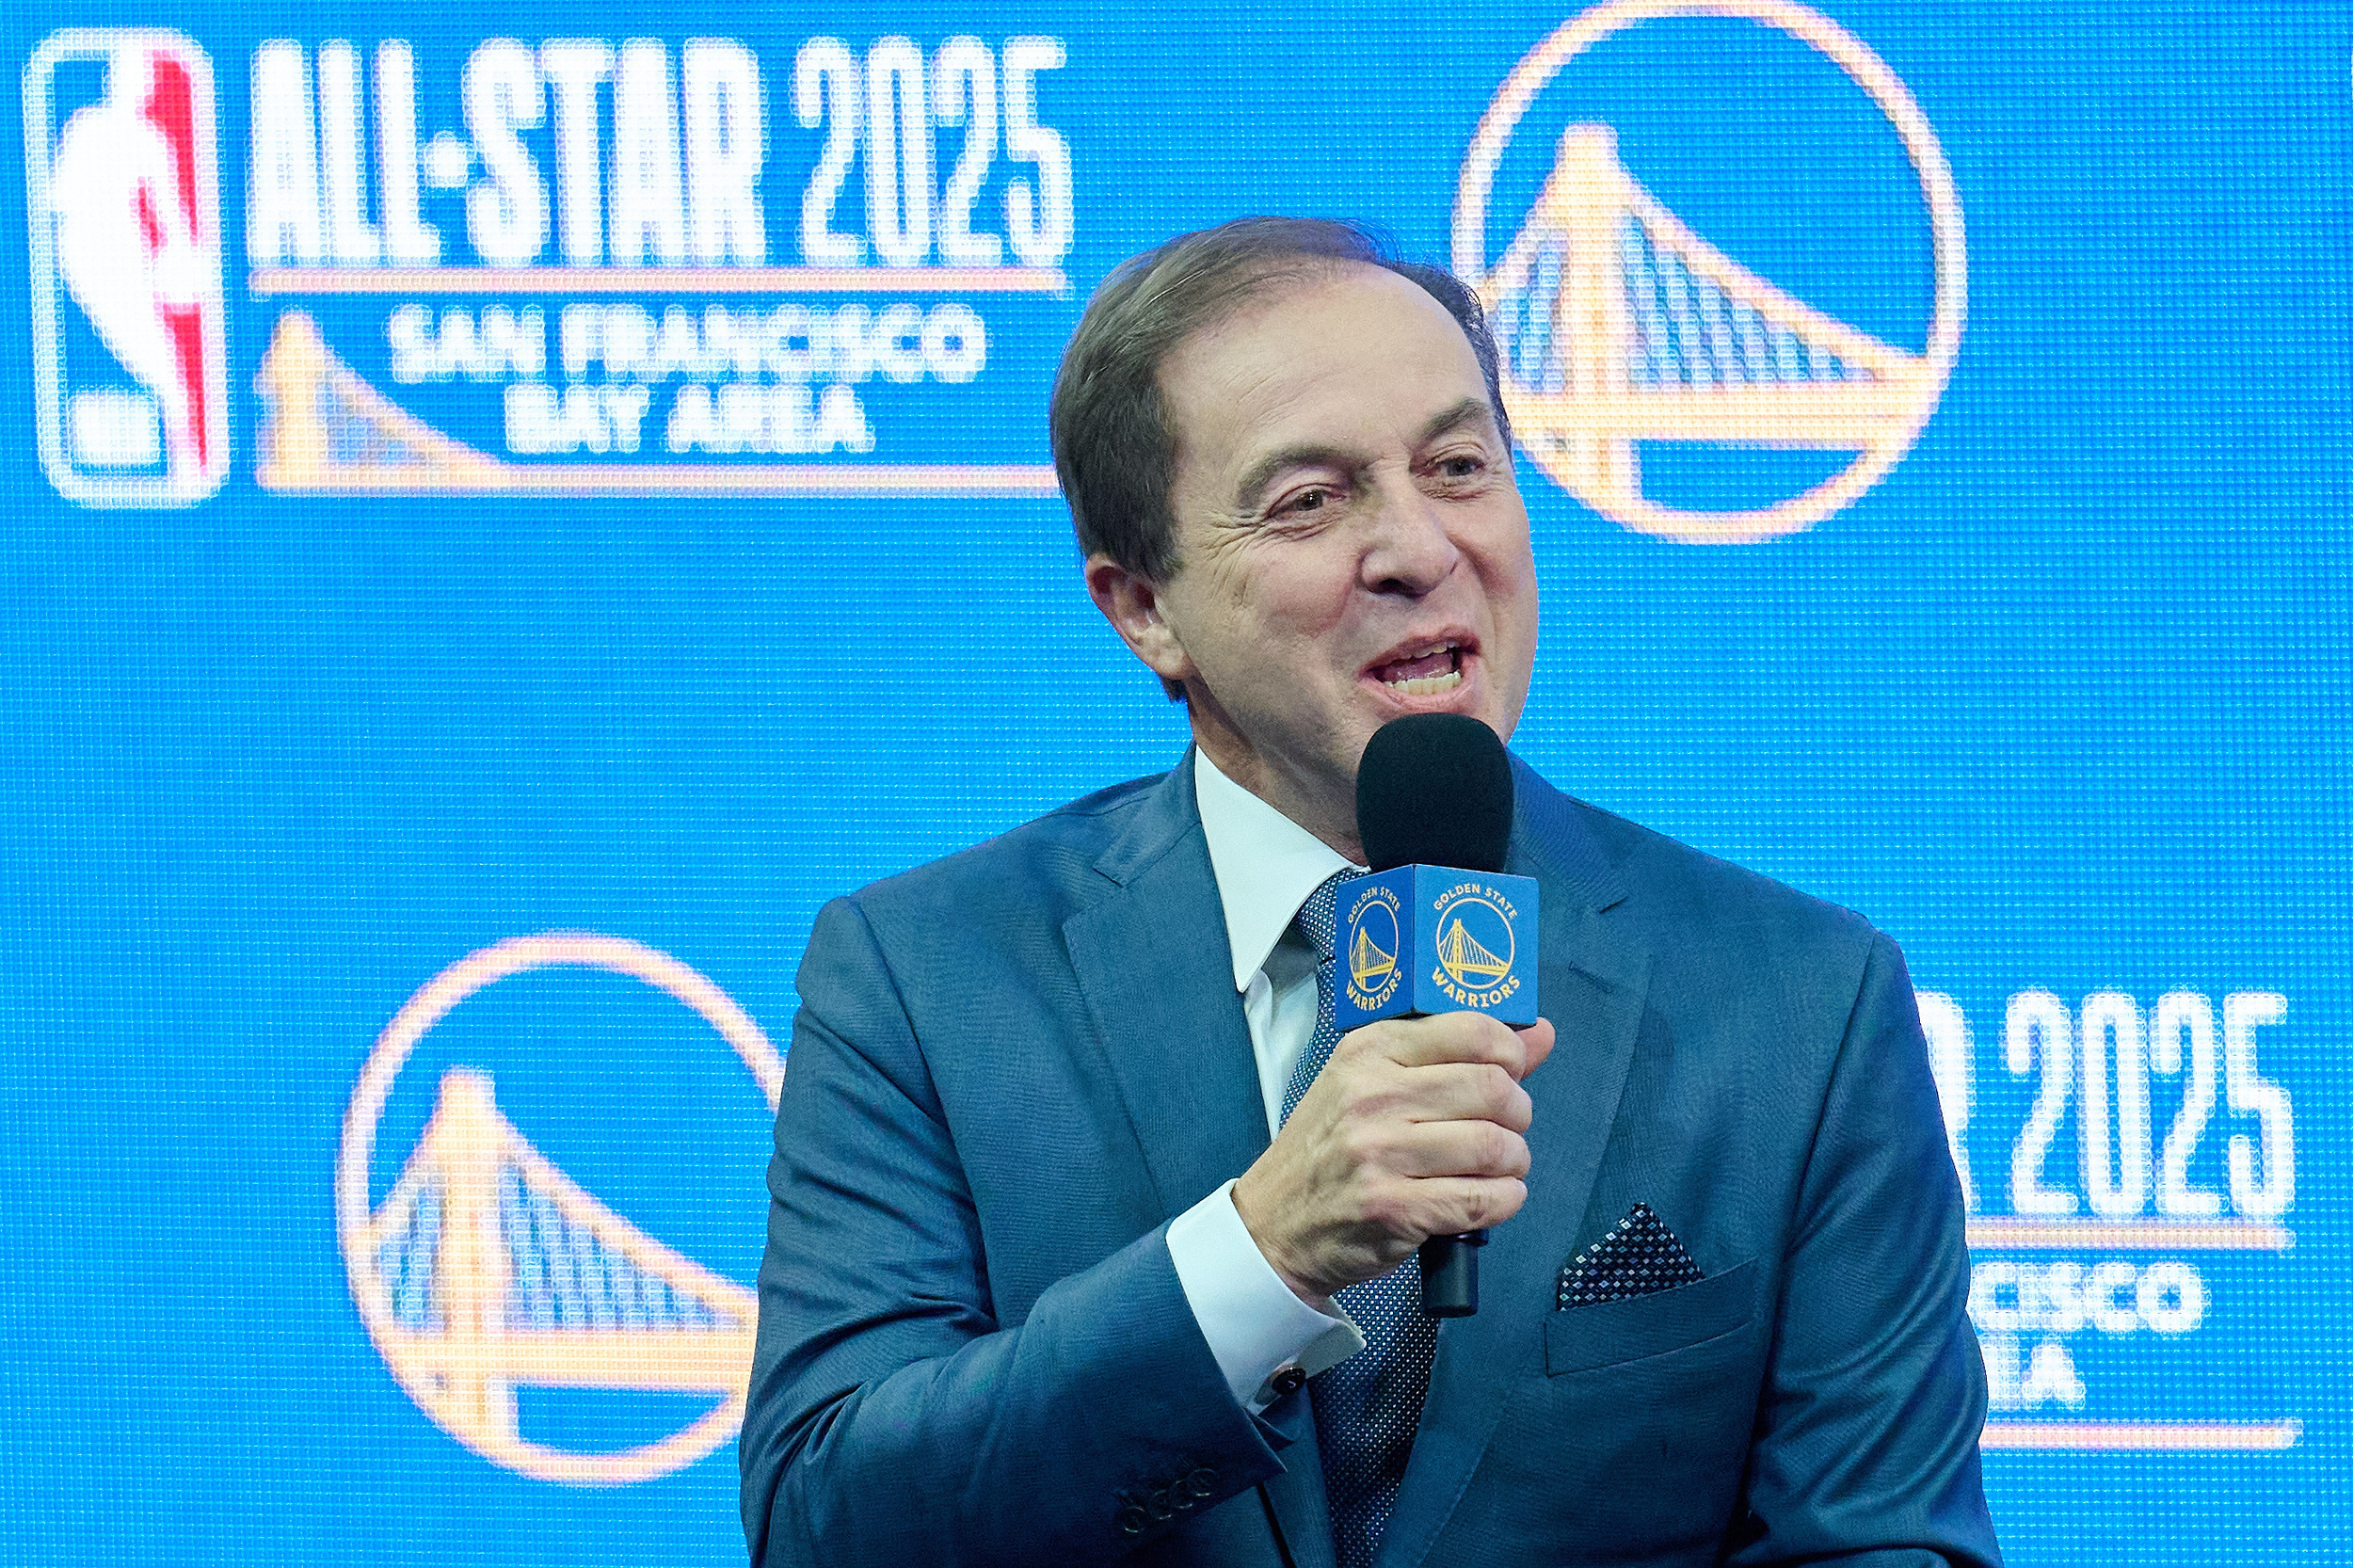 warriors owner on push to trade for lebron james: 'we are not here to screw around'